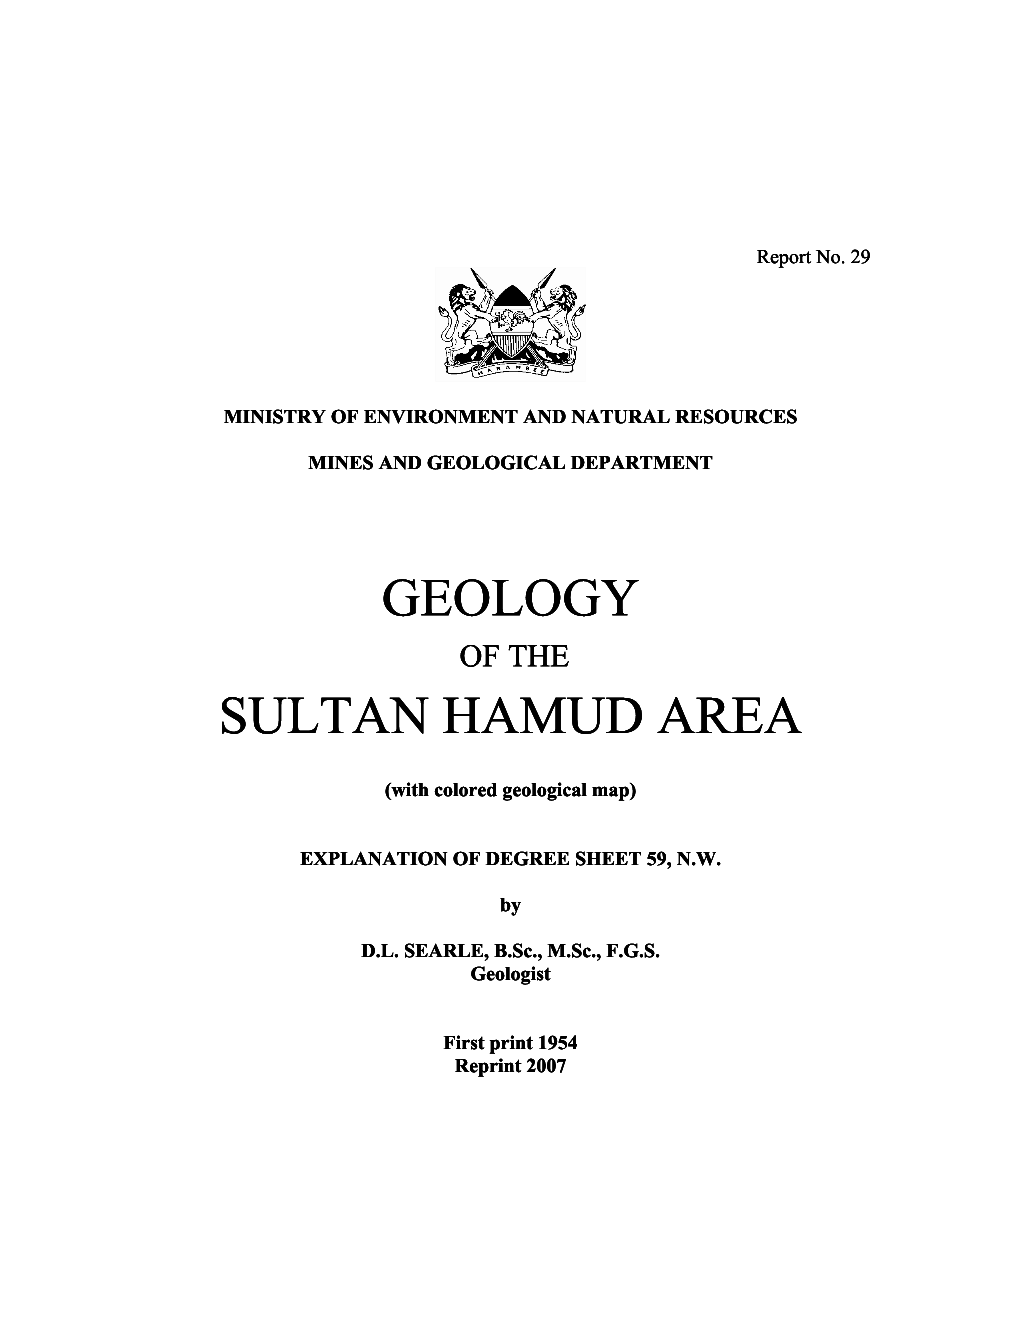 Geology of the Sultan Hamud Area